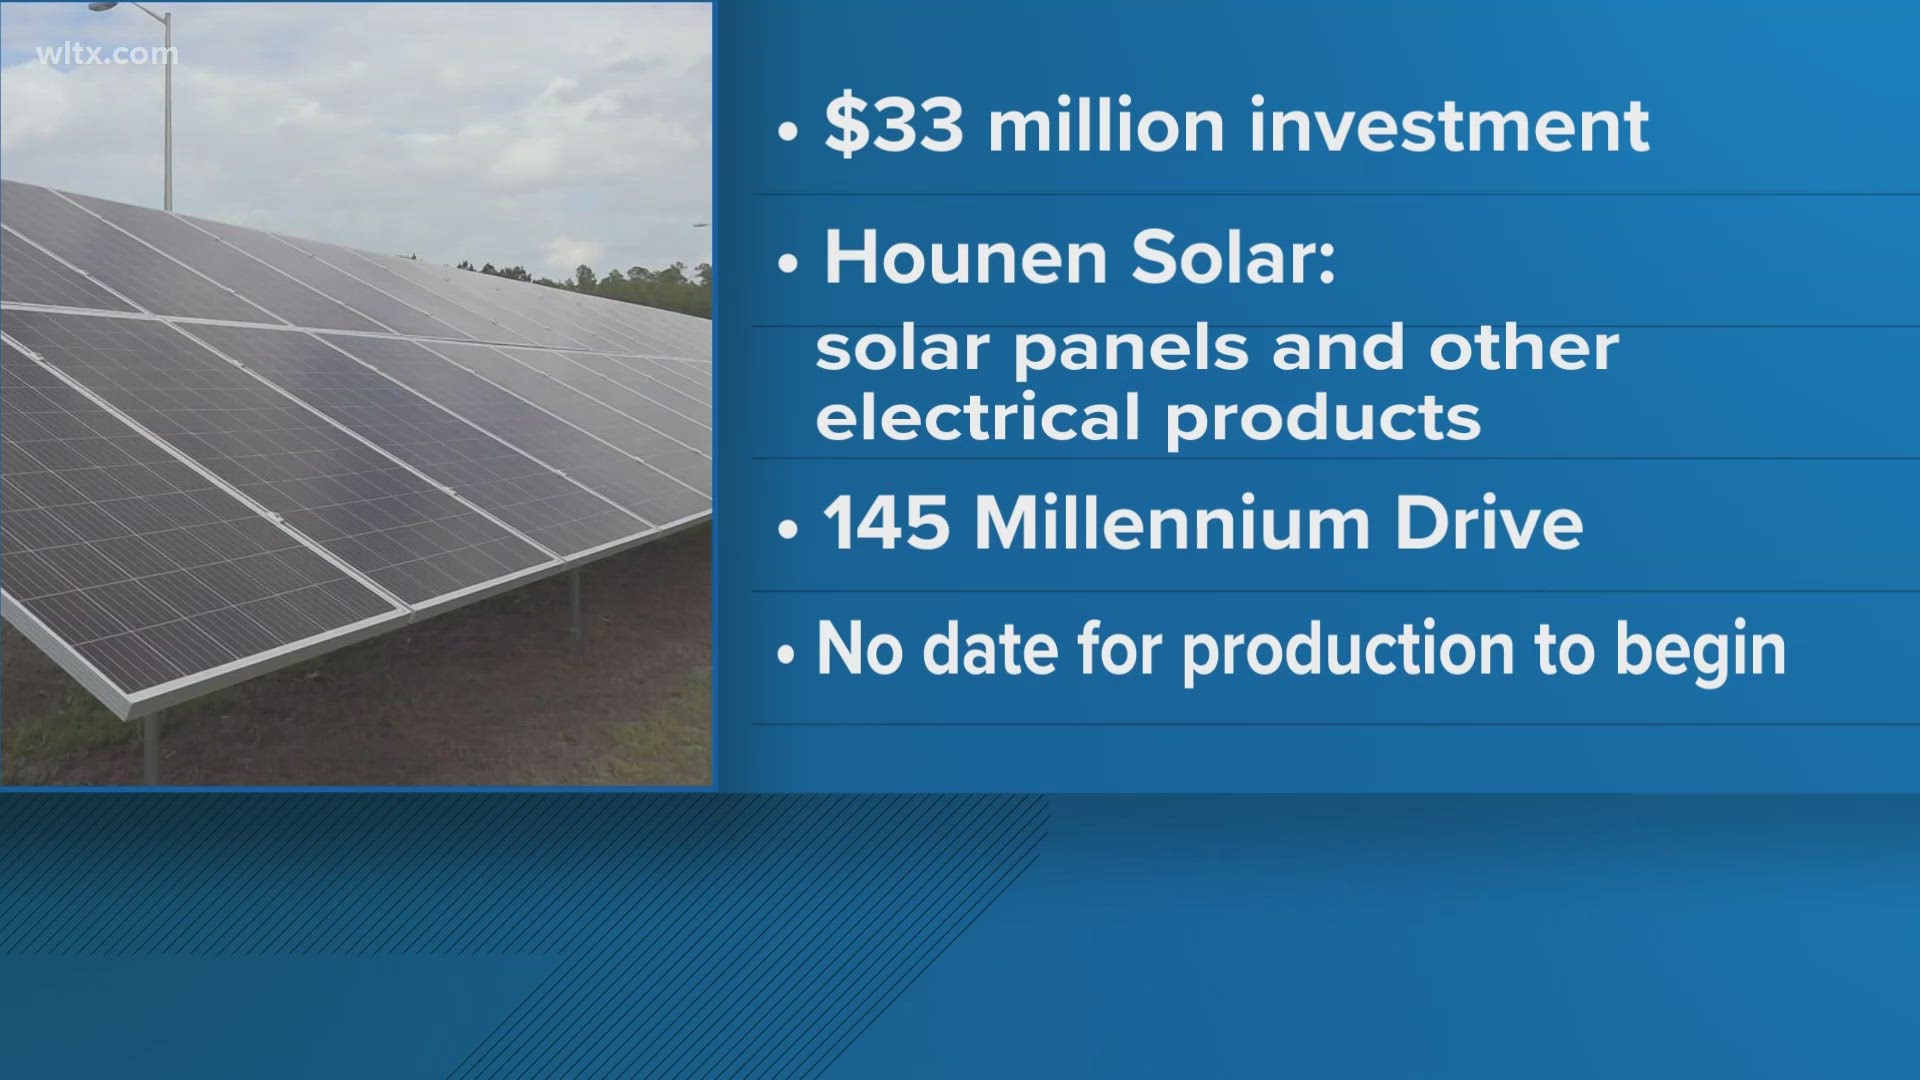 California-based Hounen Solar to establish first US manufacturing operations in South Carolina